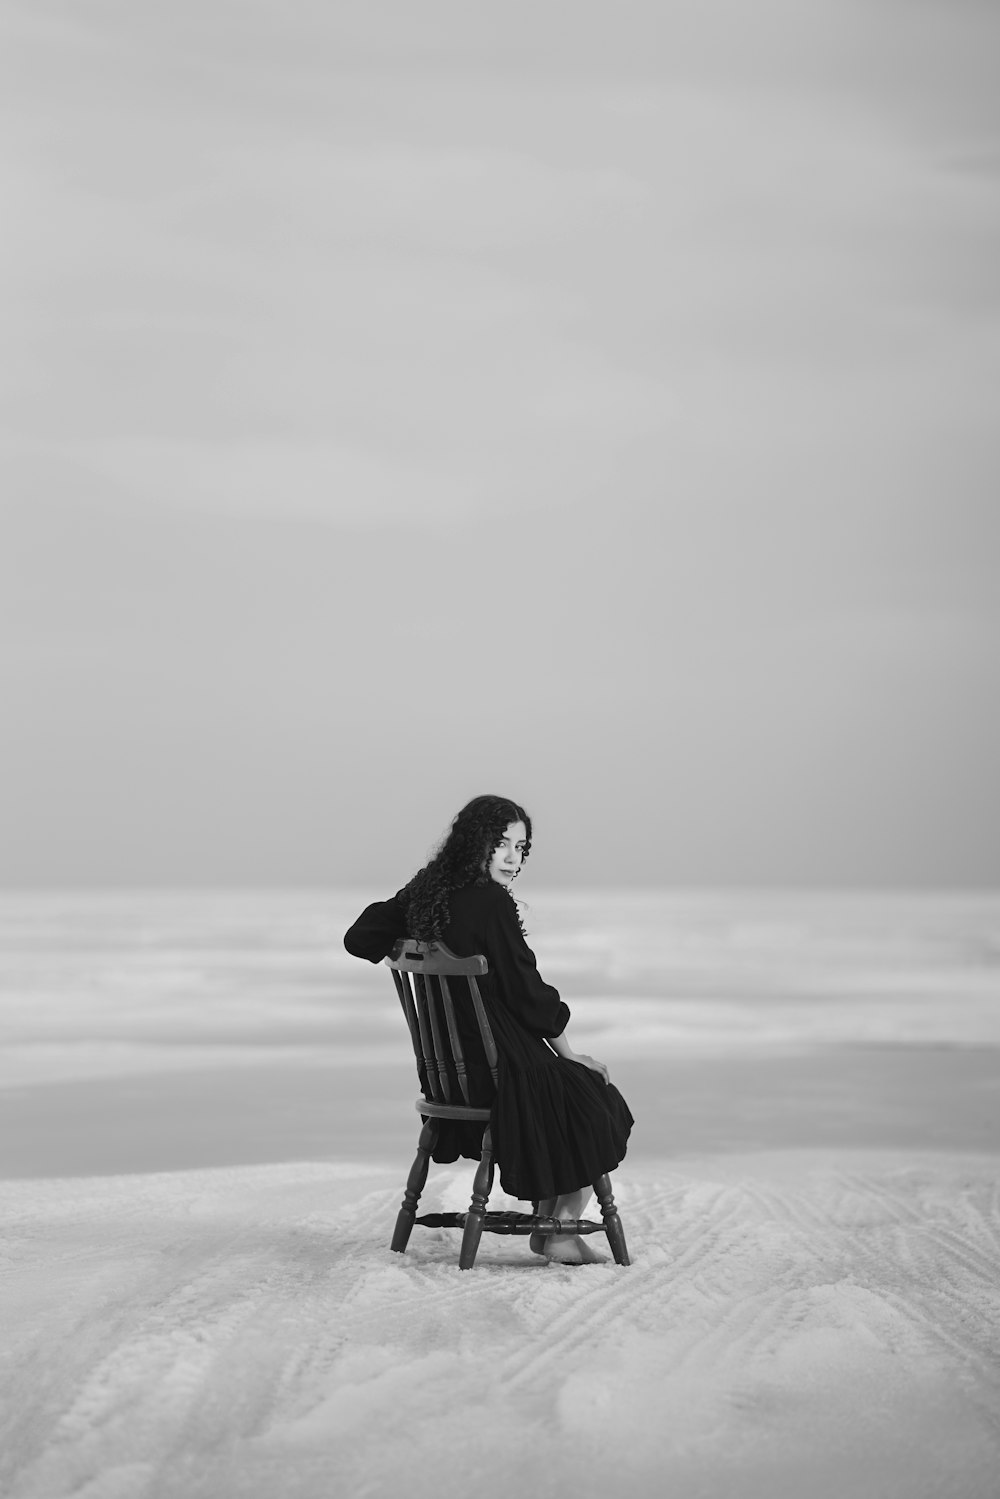 a person sitting on a chair in the snow